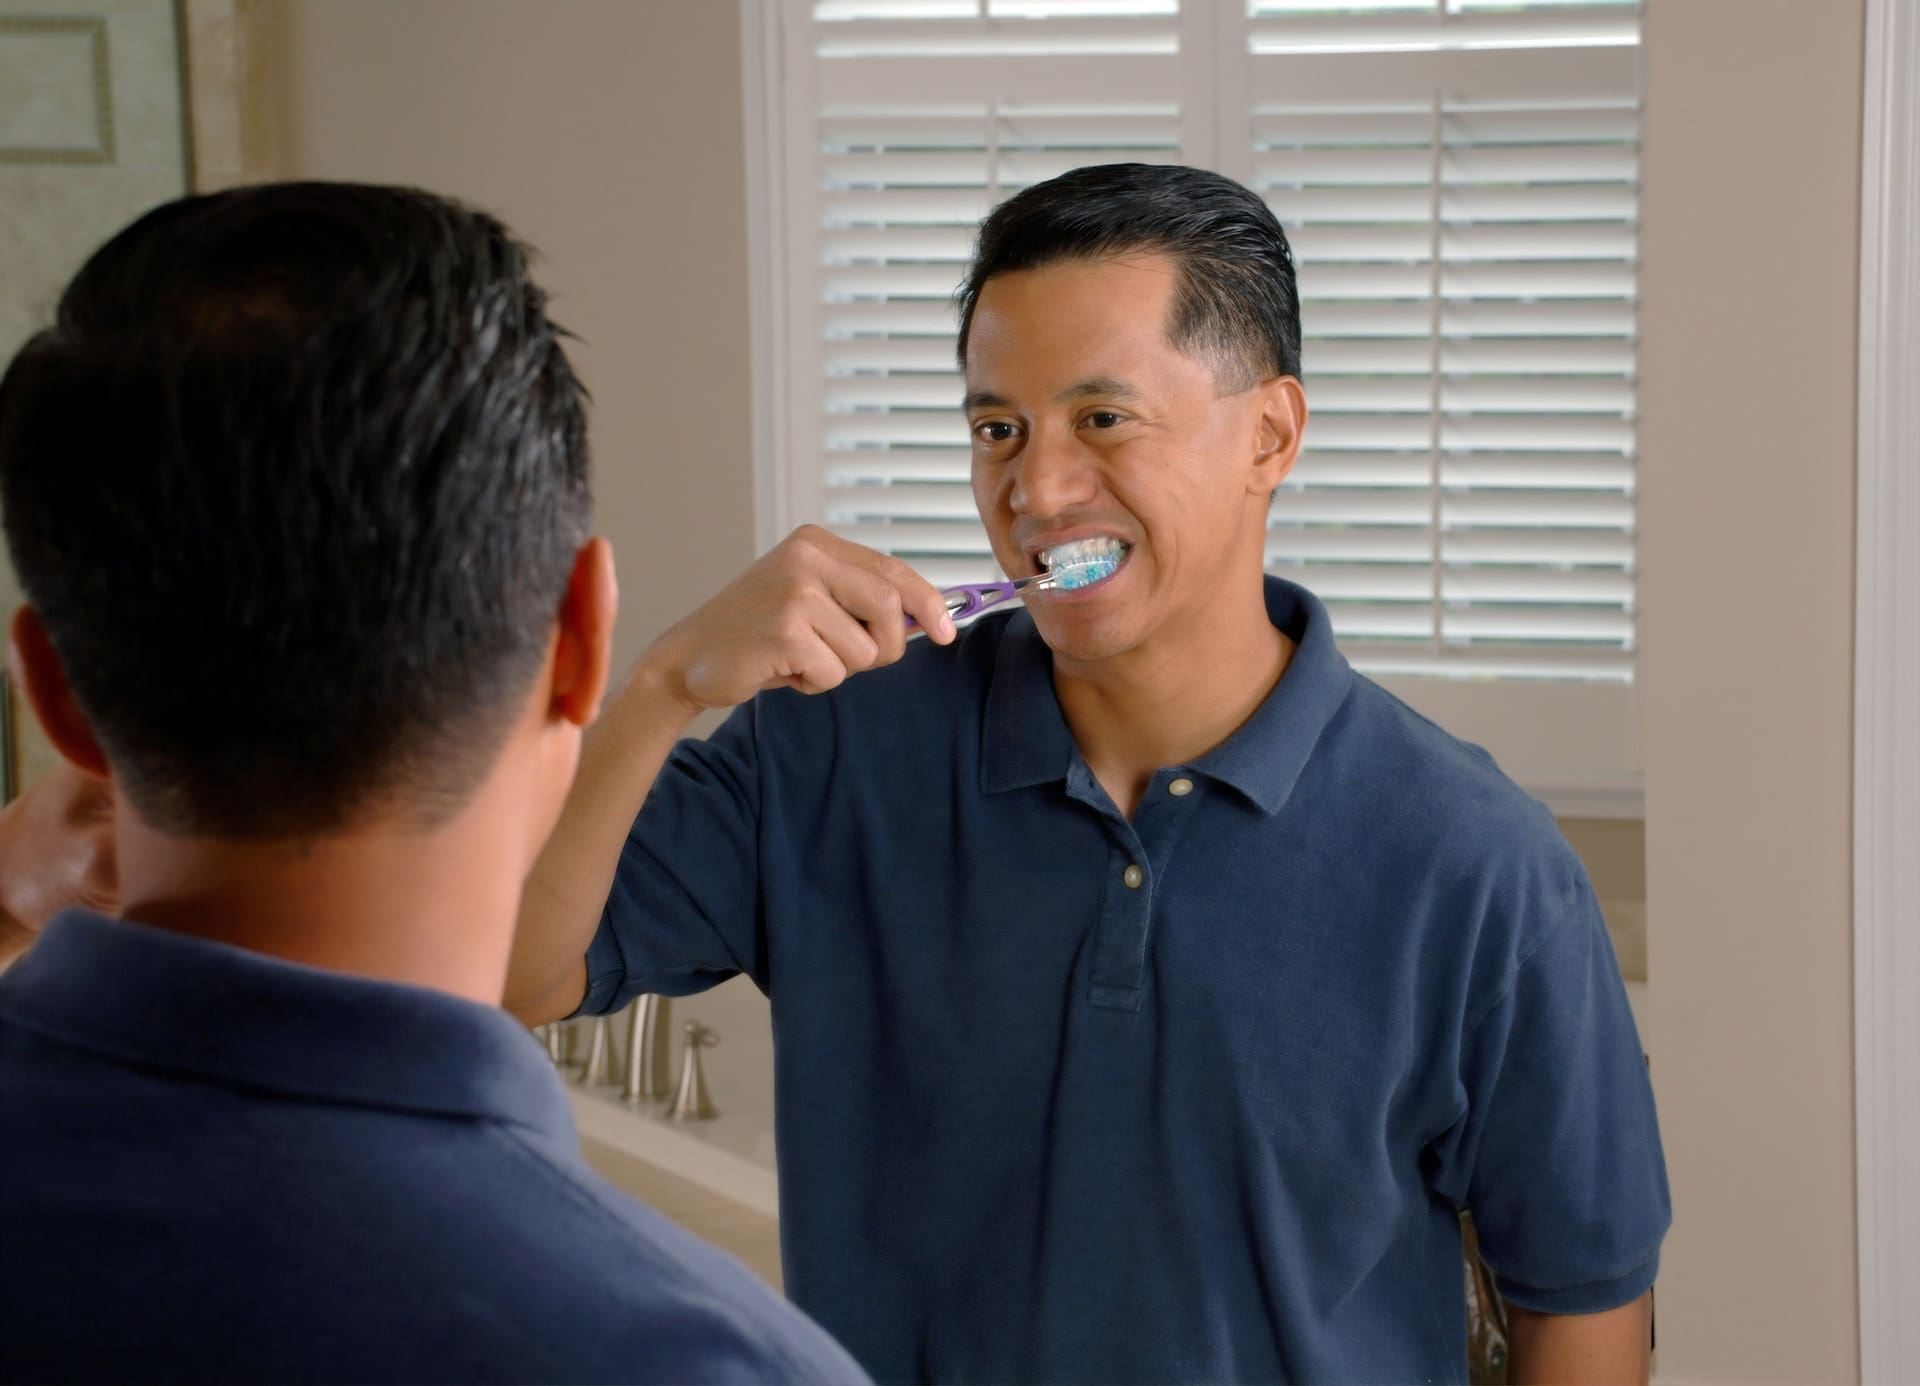 Male patient brushing his teeth and smiling while looking at himself in the mirror.